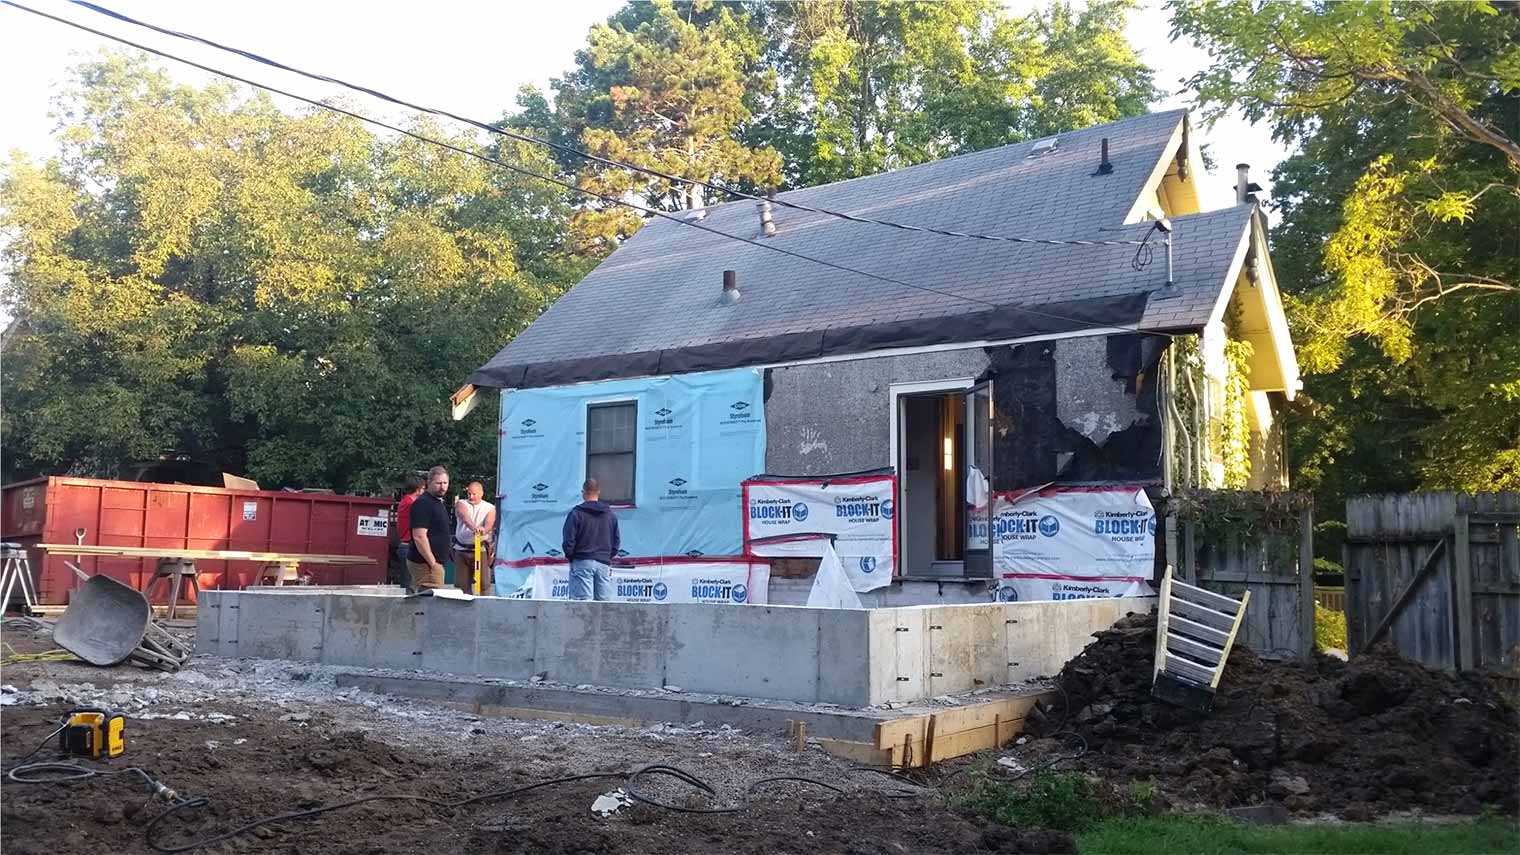 in progress remodel of 1920s Des Moines Craftsman house being remodeled by silent Rivers has foundation poured for addition